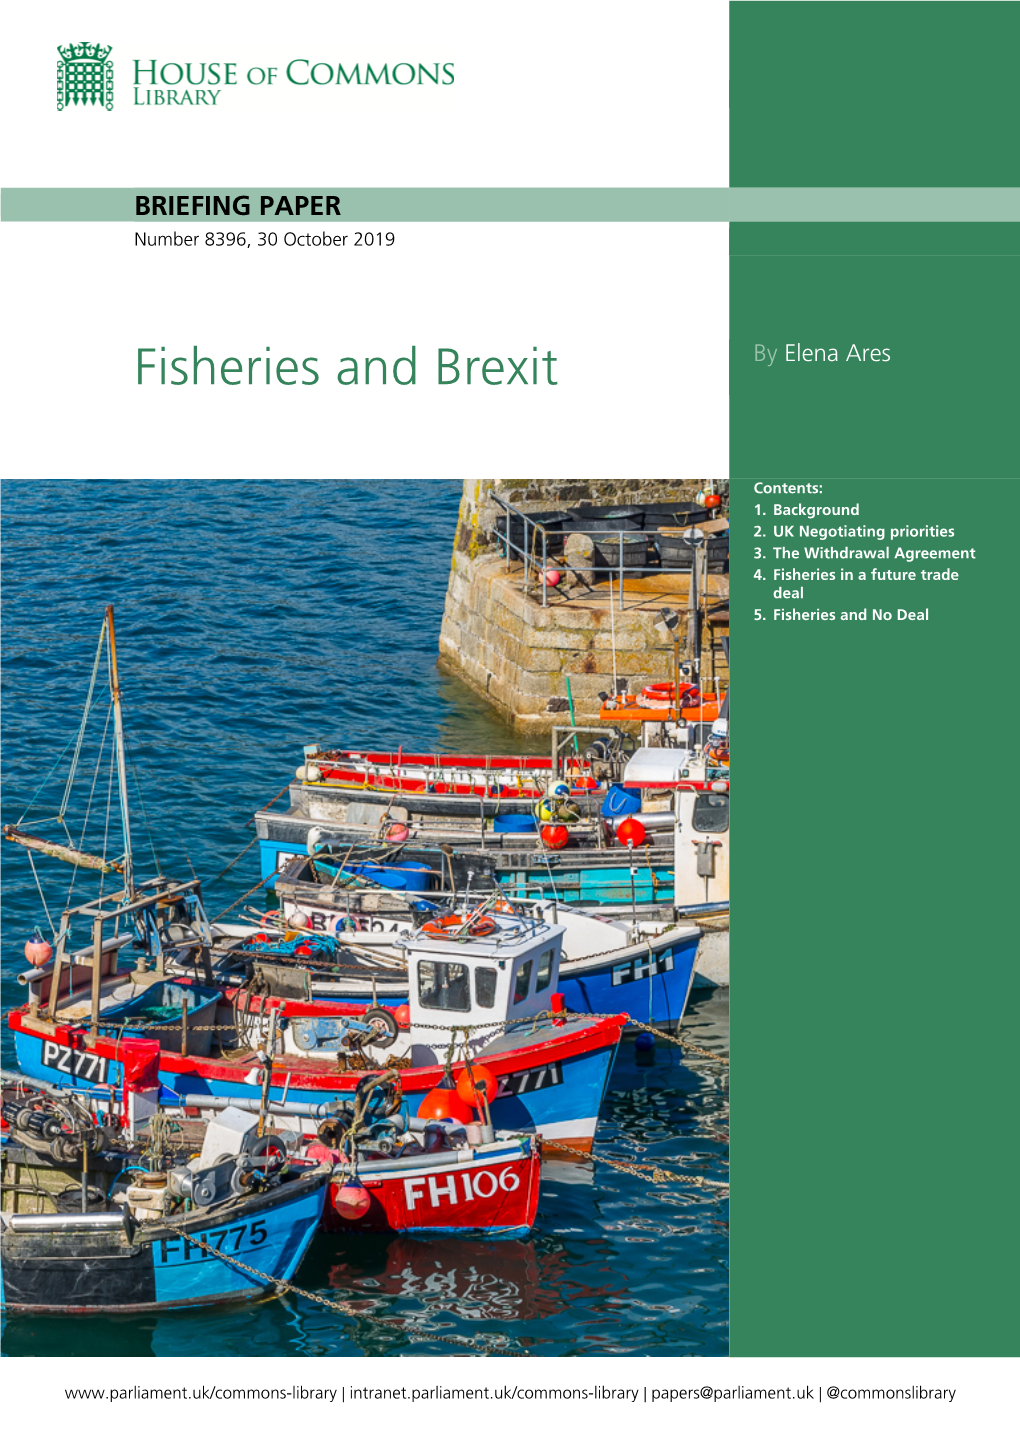 Fisheries and Brexit